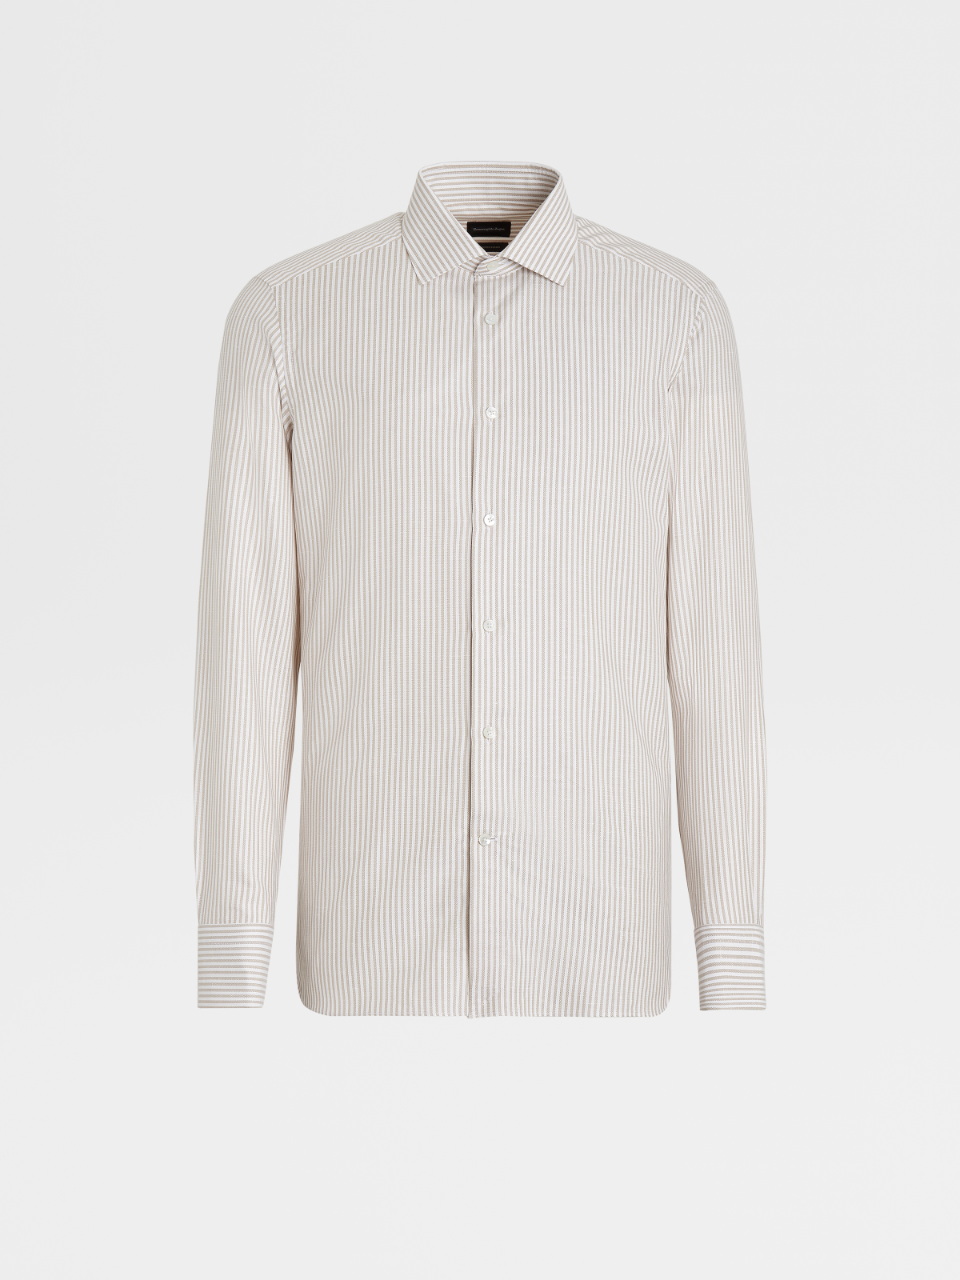 White Striped Crossover Cotton Linen and Silk Tailoring Shirt, Milano Regular Fit